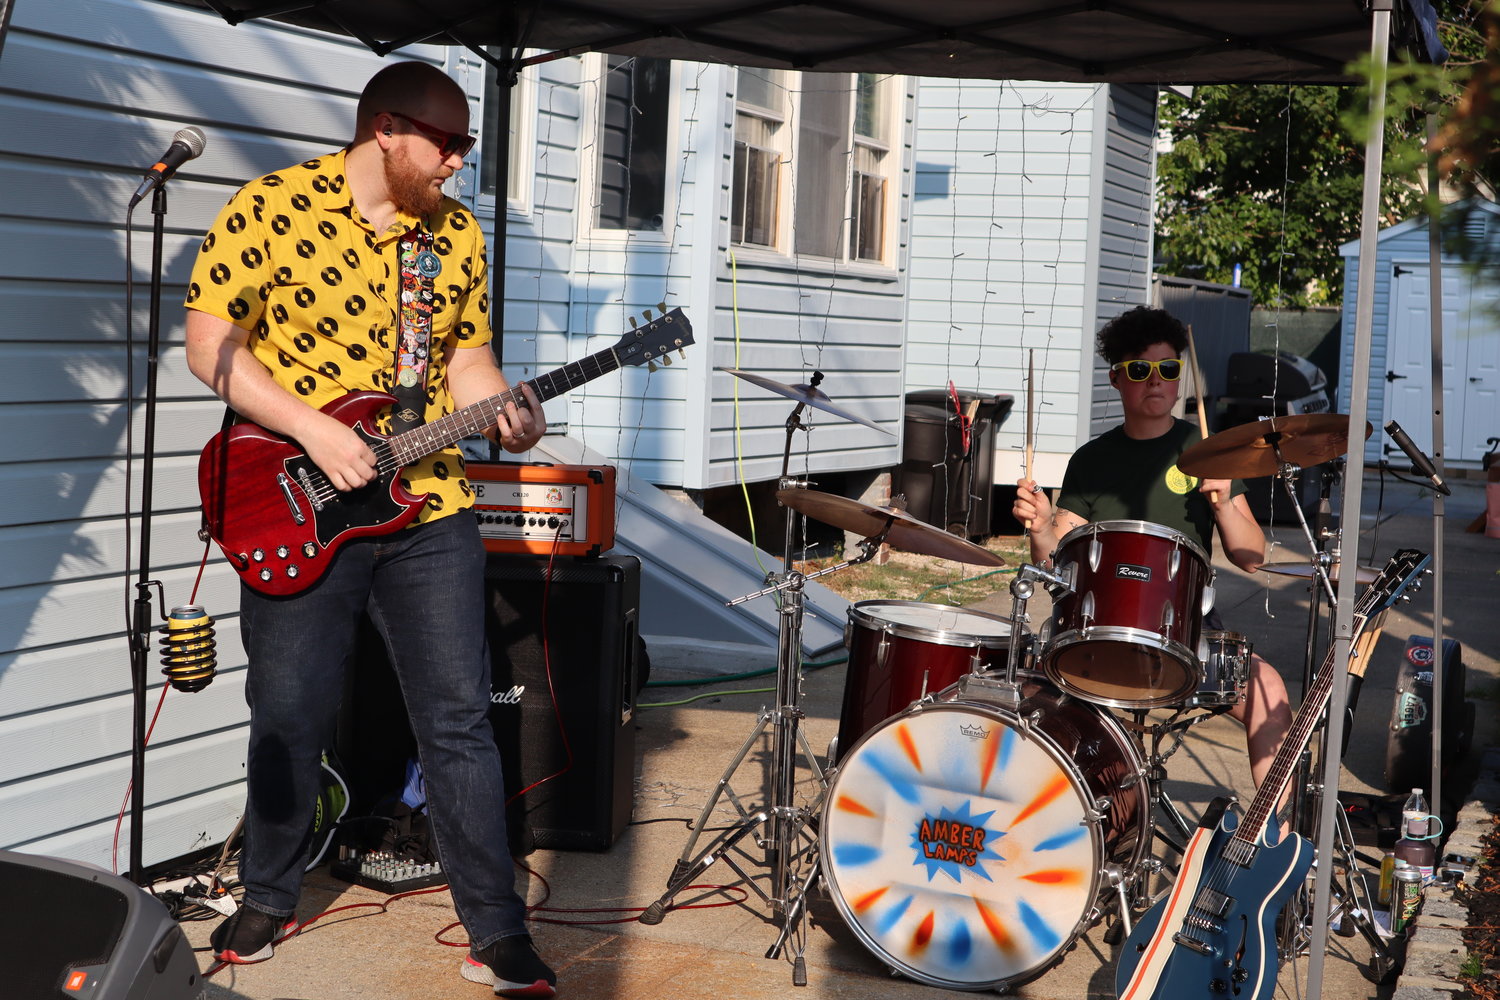 Astoria based punk rock band Amber Lamps play along St. Marks Avenue for the Playing on the Porch concert series.